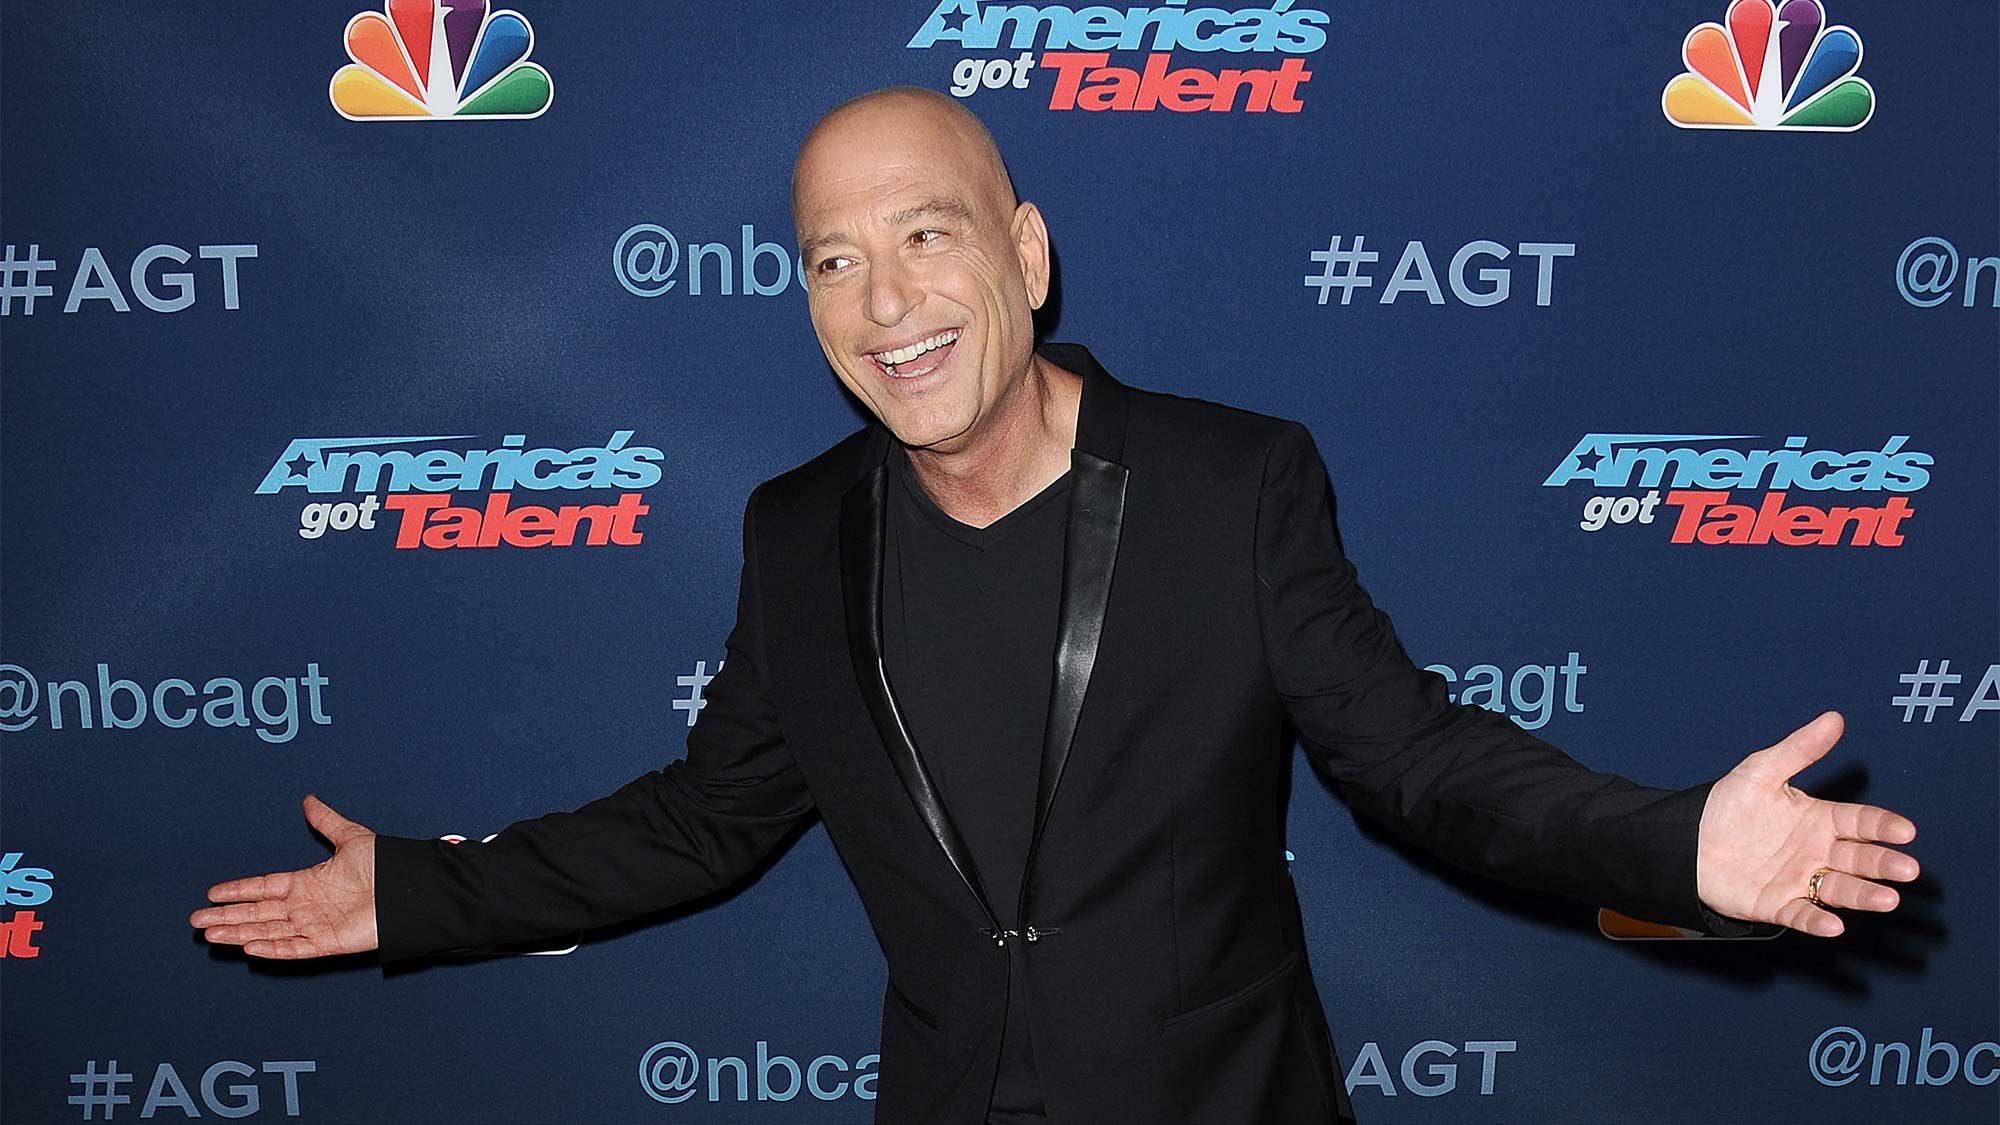 'AGT' judge Howie Mandel rushed to hospital after passing out at Starbucks in Los Angeles: report